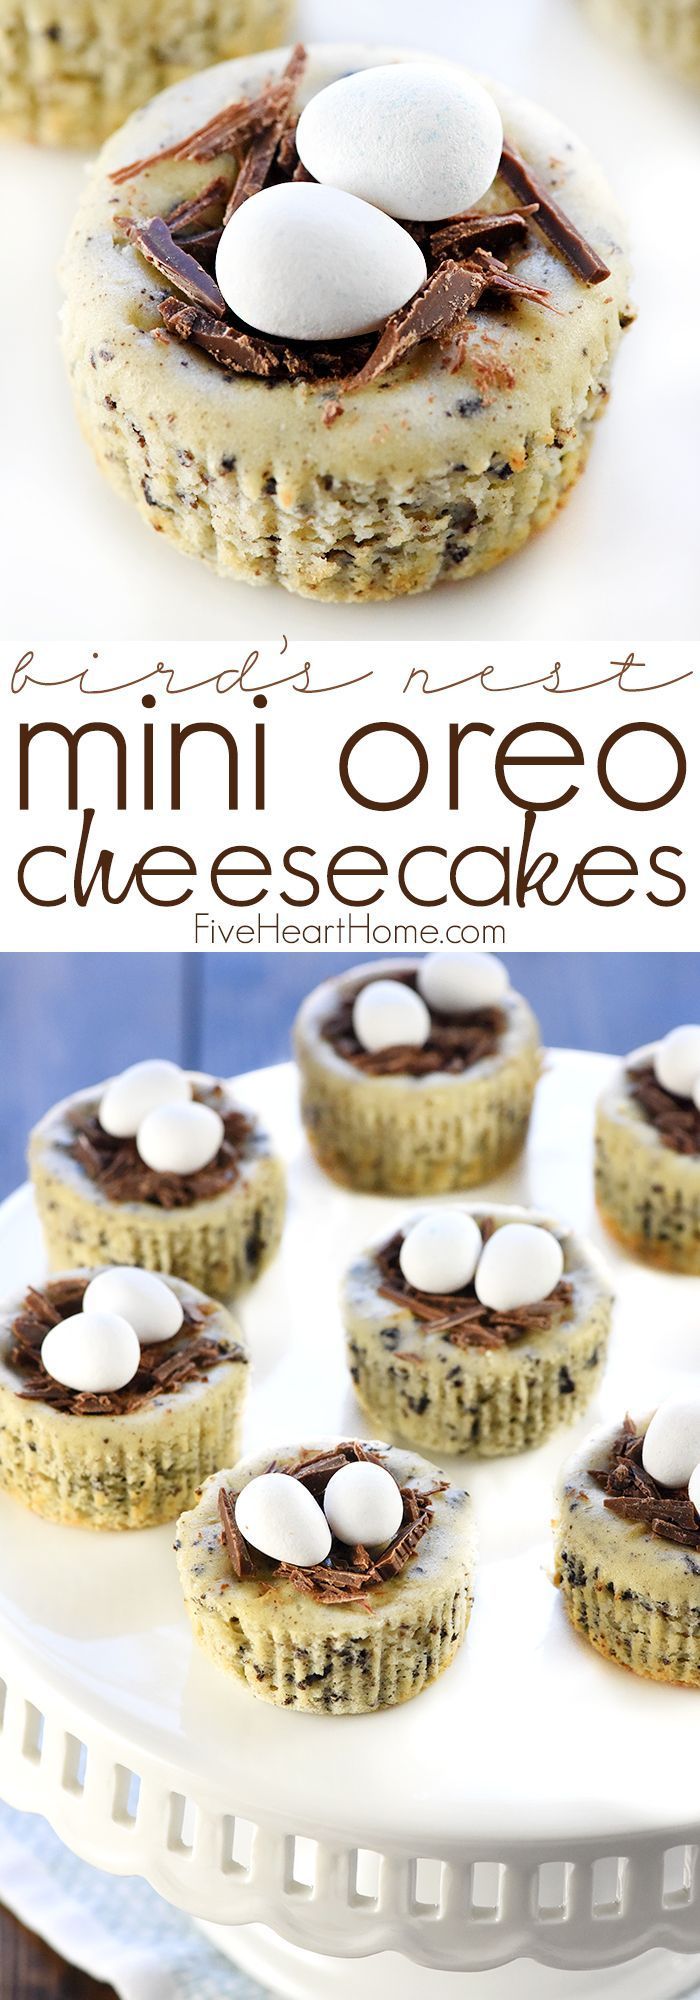 Bird's Nest Mini Oreo Cheesecakes | Easter Dessert Recipe ~ simple cheesecake filling is studded with Oreos, baked in muffin pans, and topped with chocolate shavings and candy eggs for a fun, easy treat that's perfect for spring! | FiveHeartHome.com -   24 easter dessert recipes
 ideas